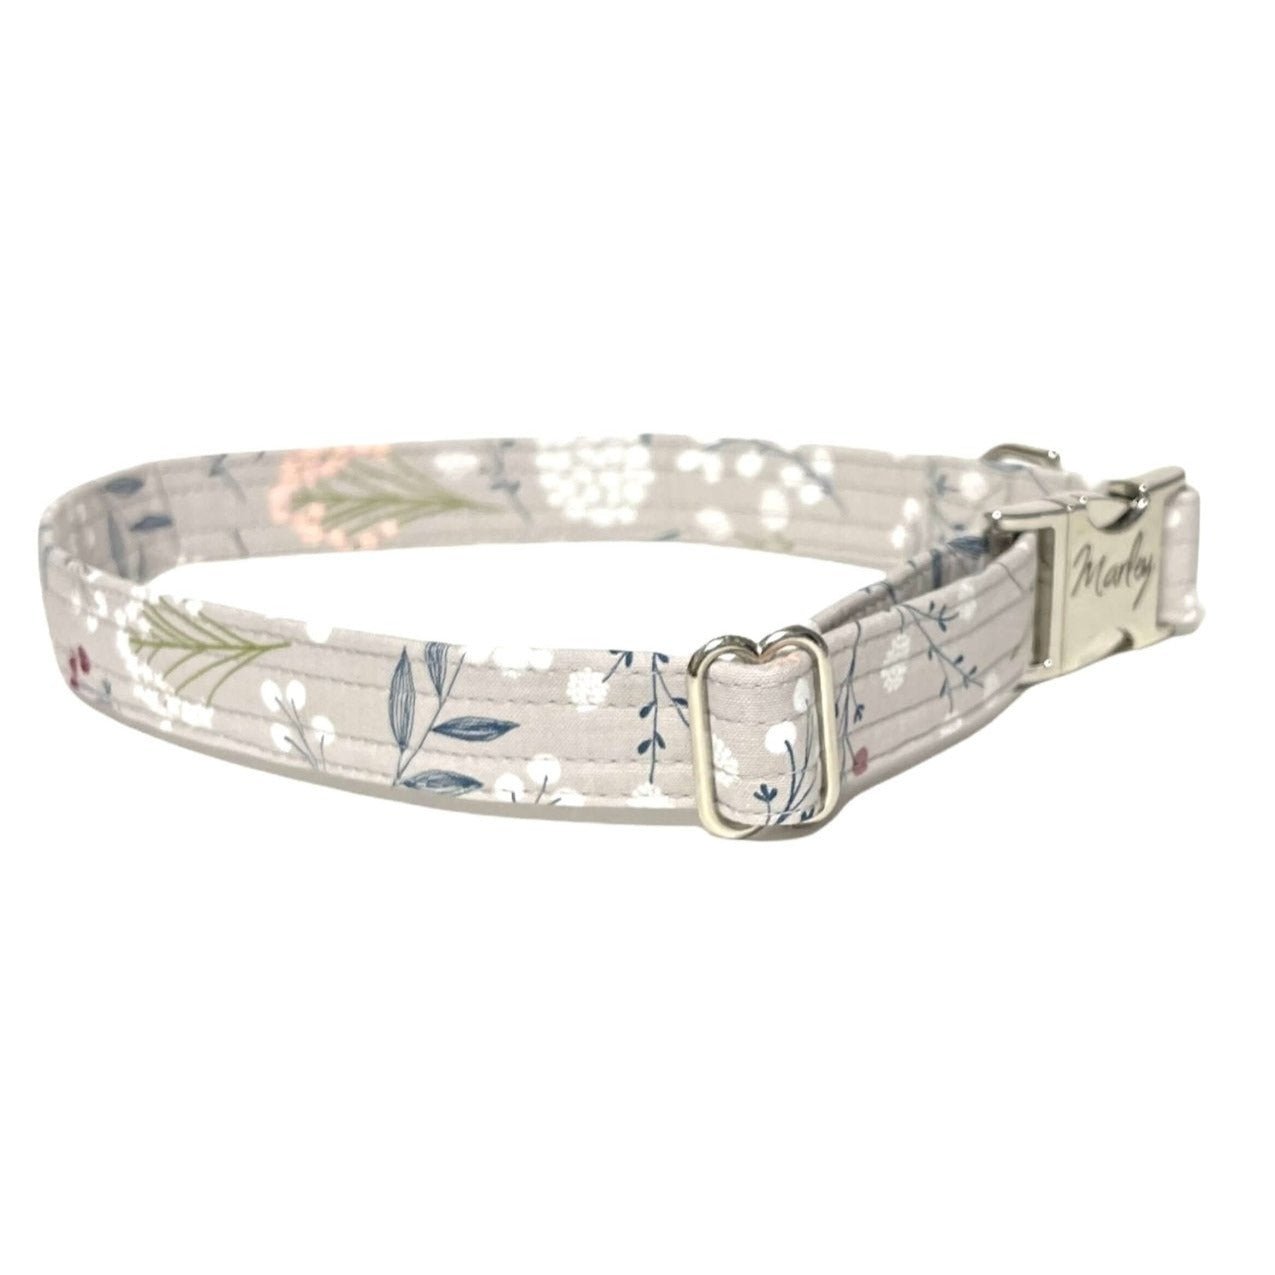 Berry Leaves Personalized Dog Collar - muttsnbones